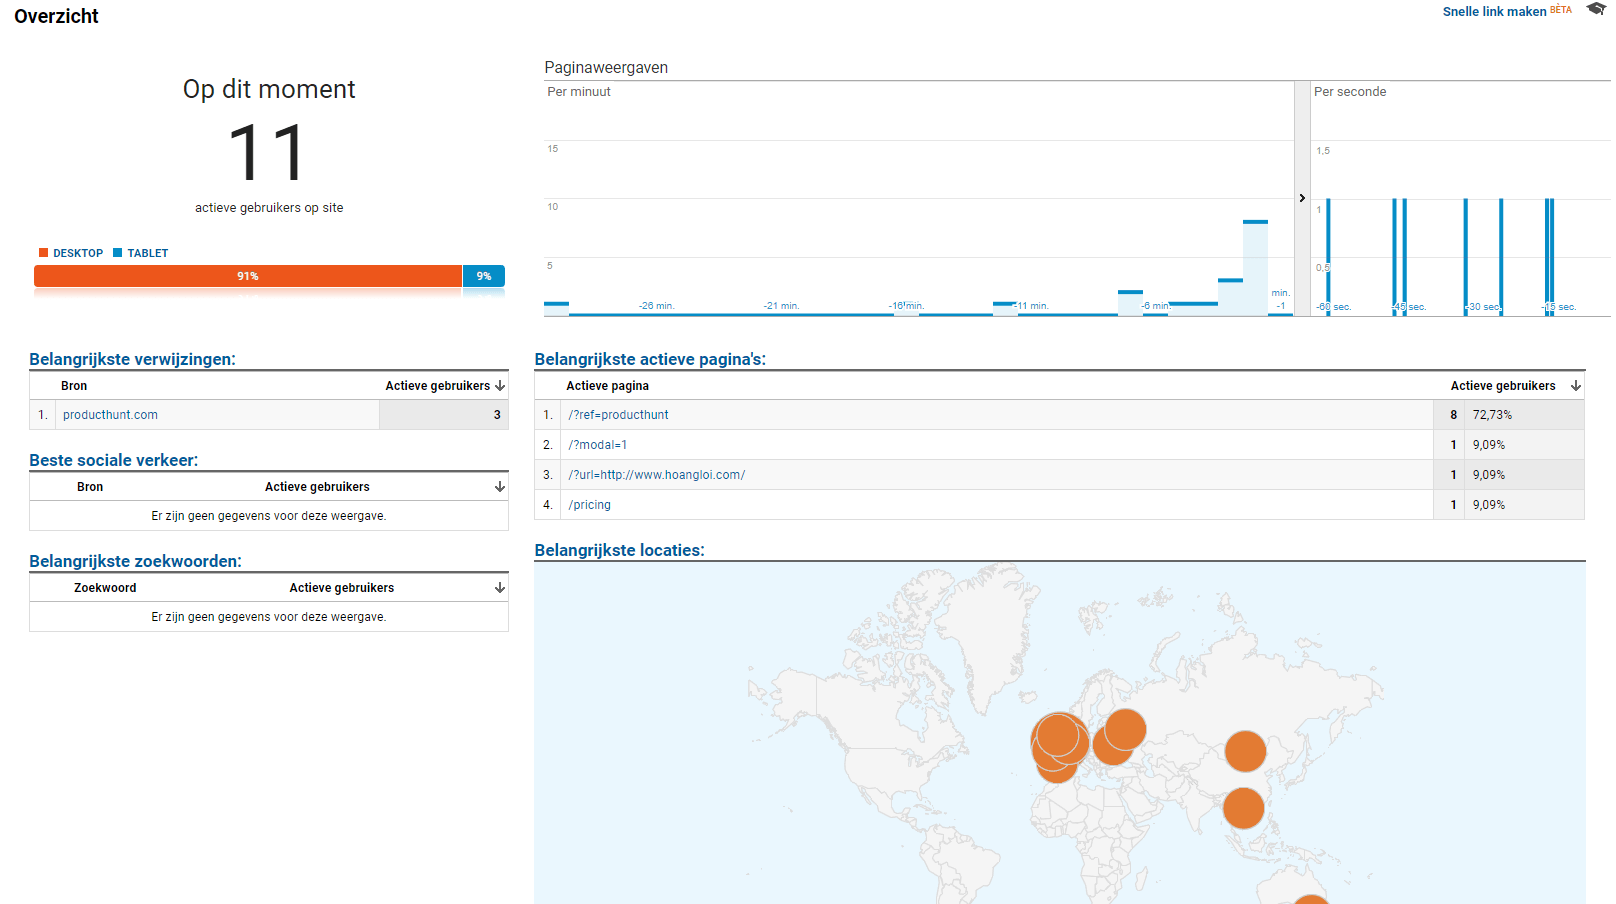 The realtime overview from Google Analytics